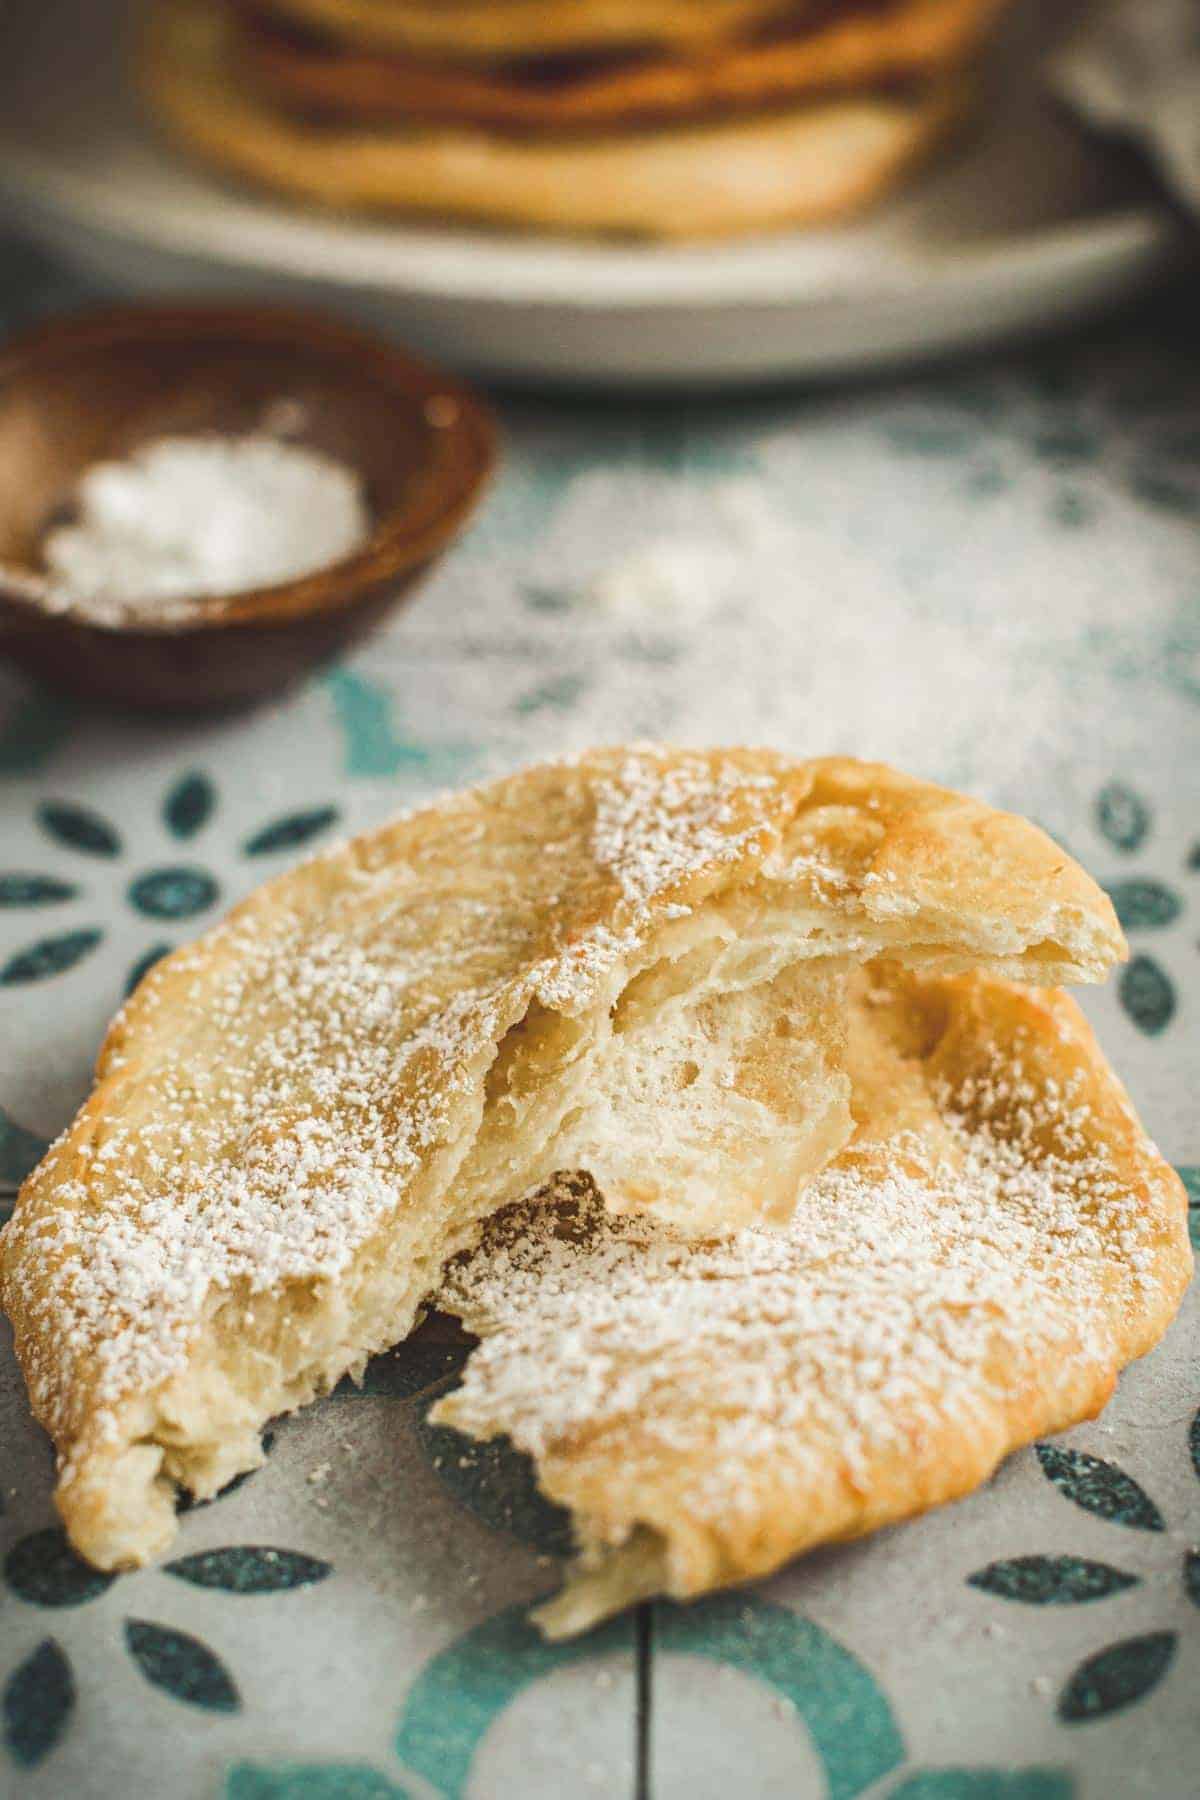 Torn fried bread dusted with powdered sugar.